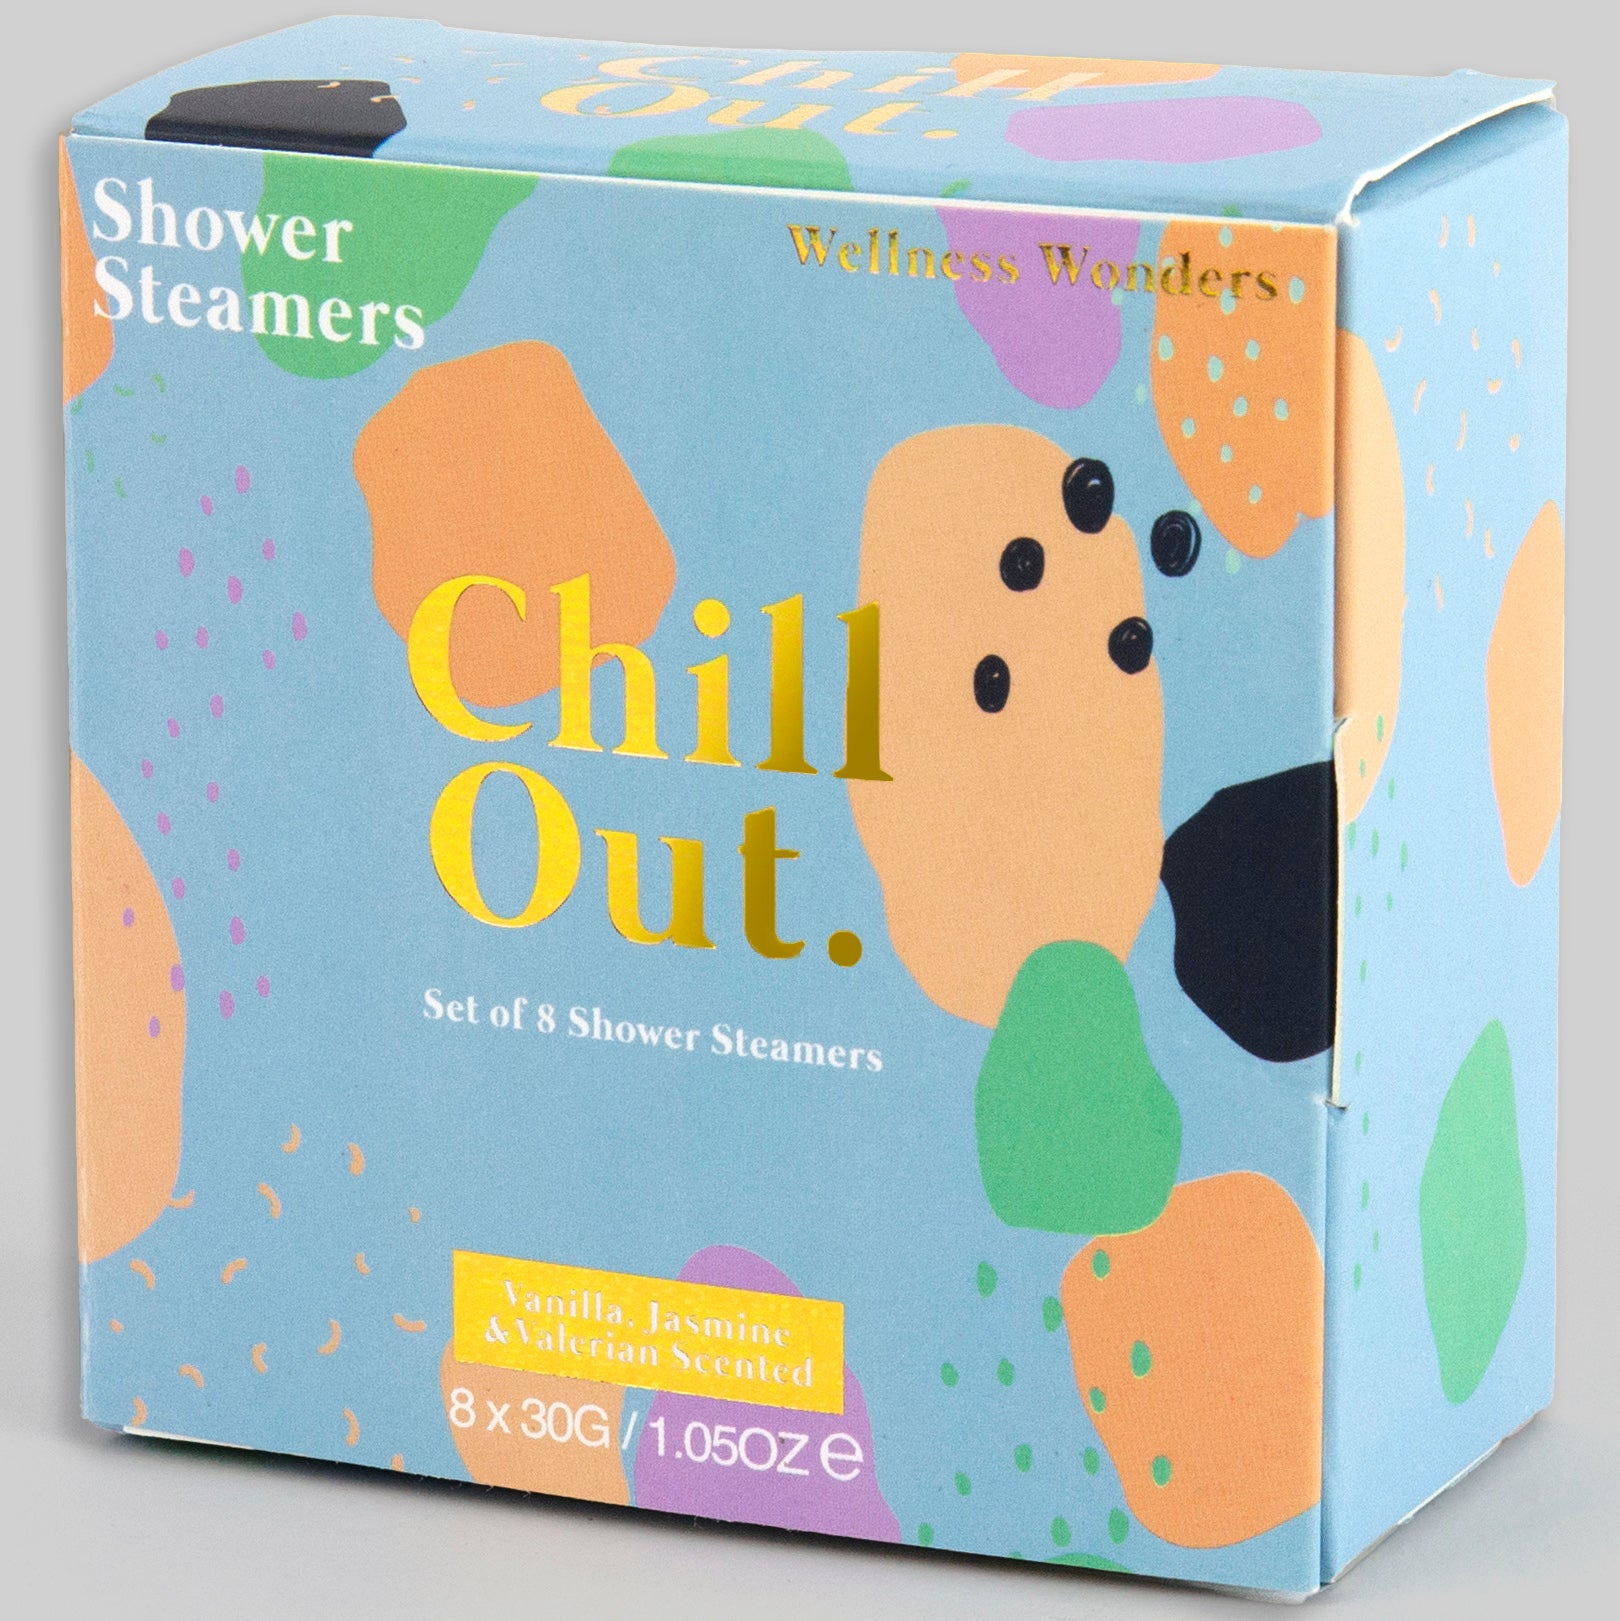 Chill Out' Aroma Shower Steamers - Pack of 8